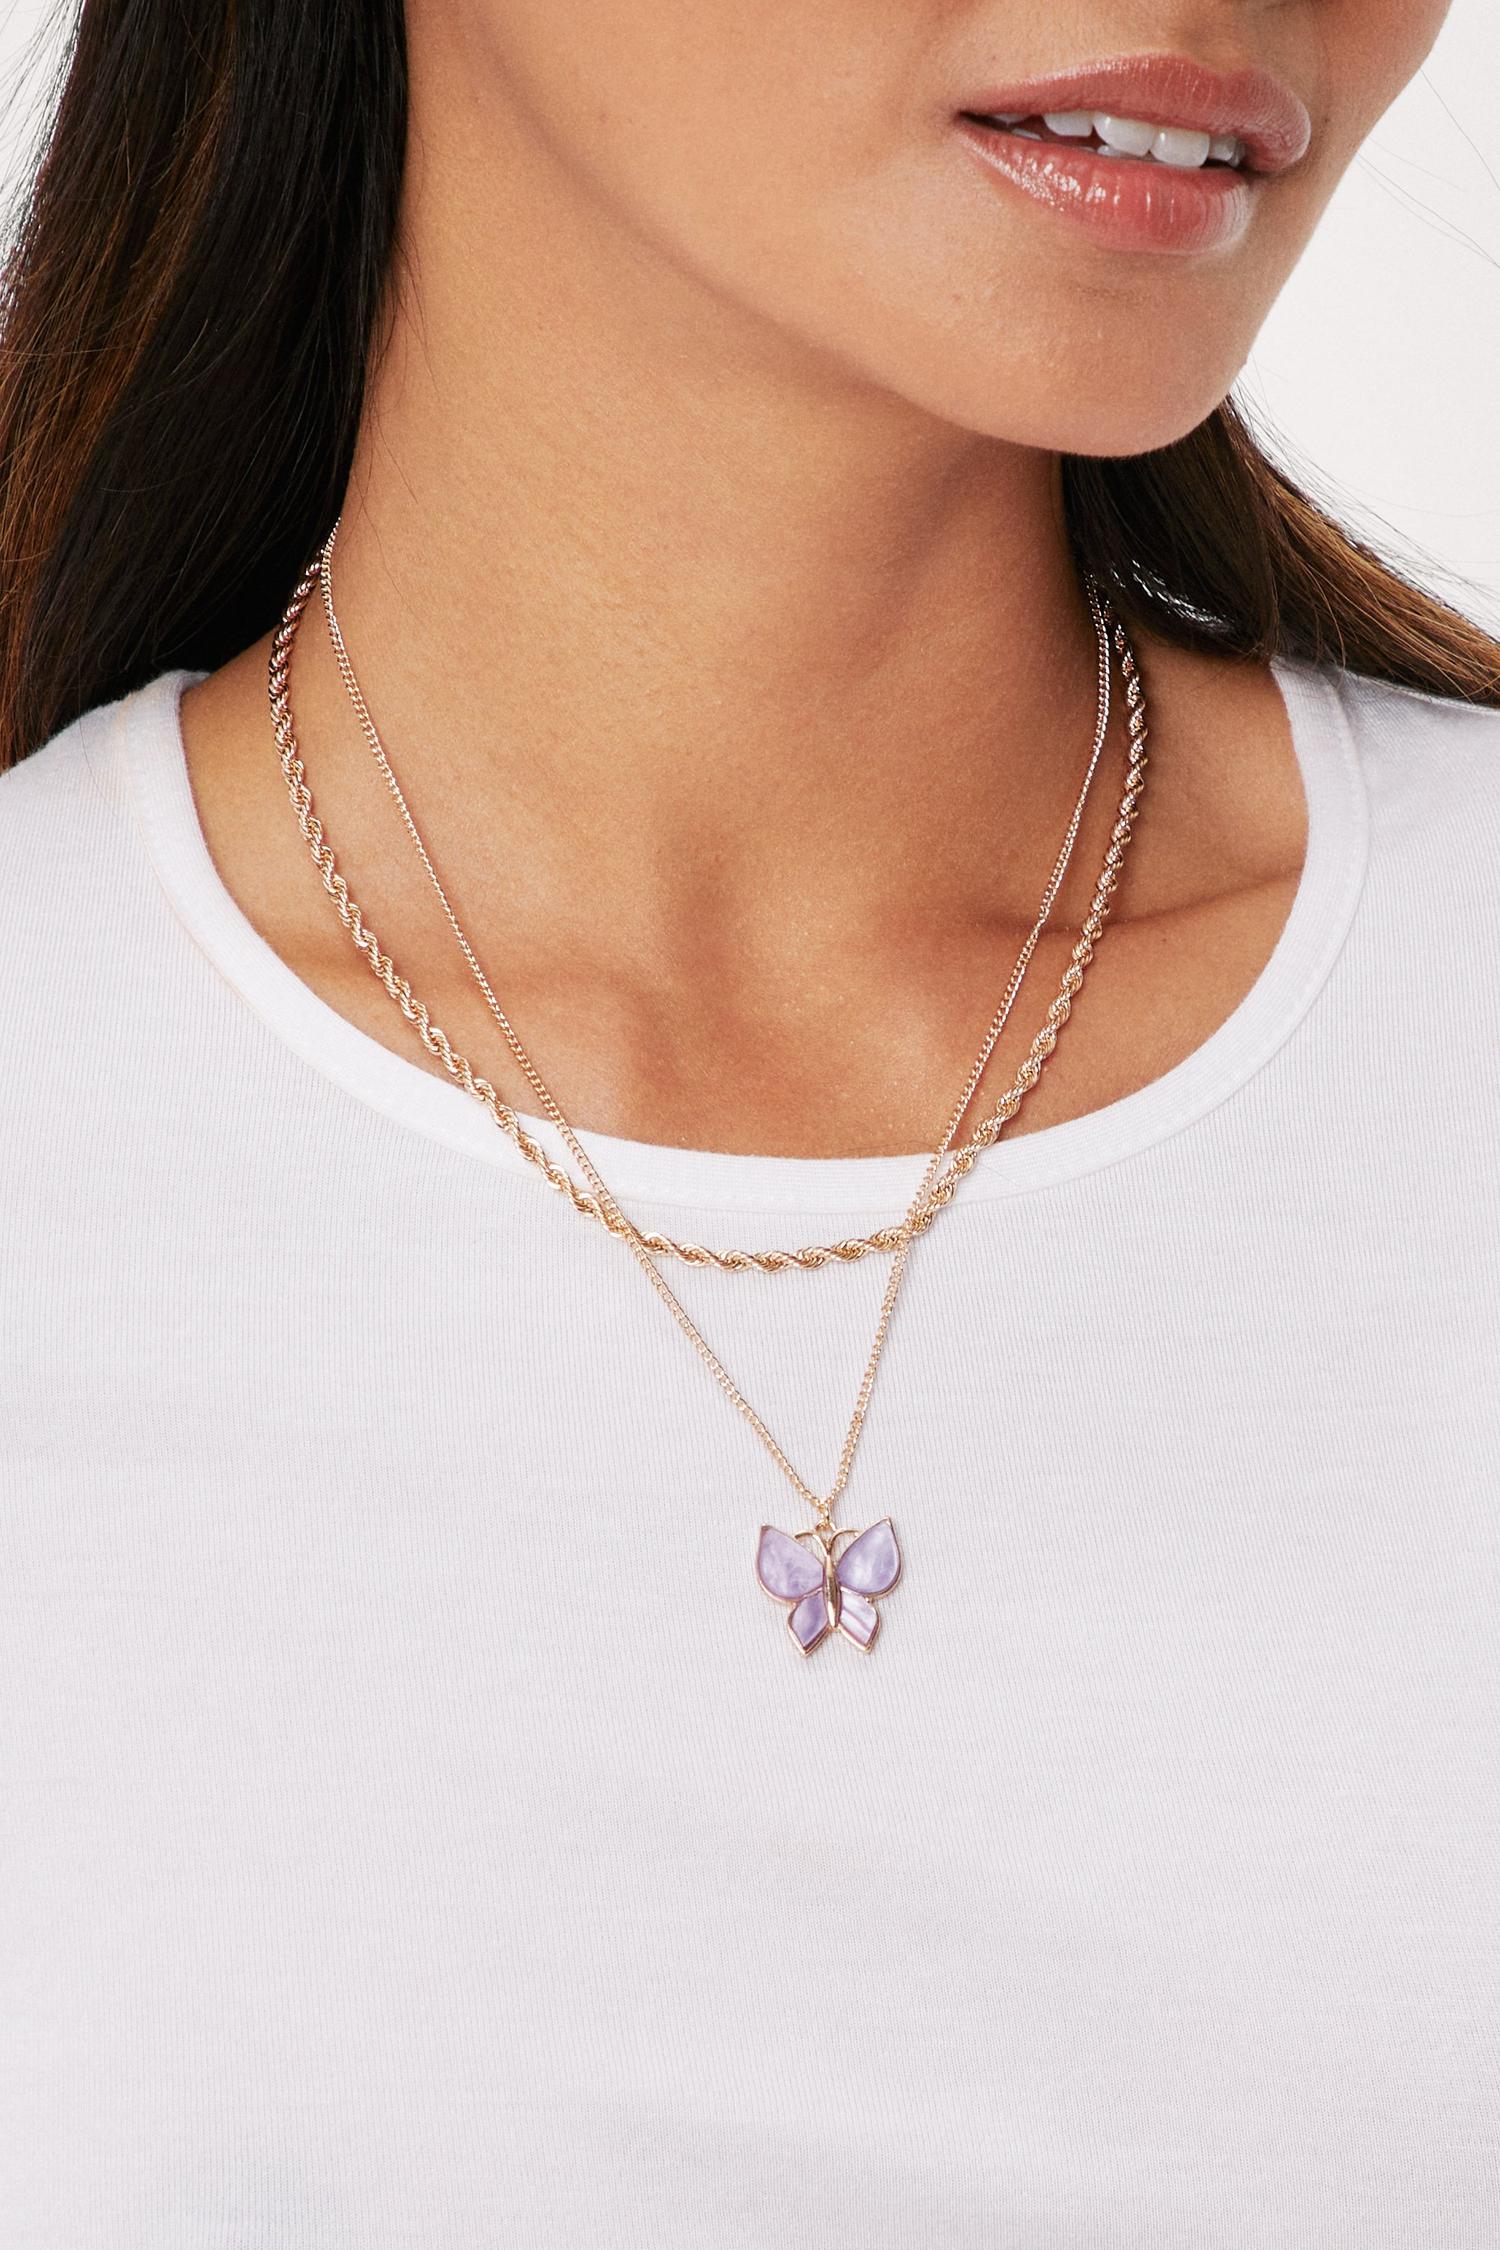 Download Butterfly Double Layered Chain Necklace Nasty Gal